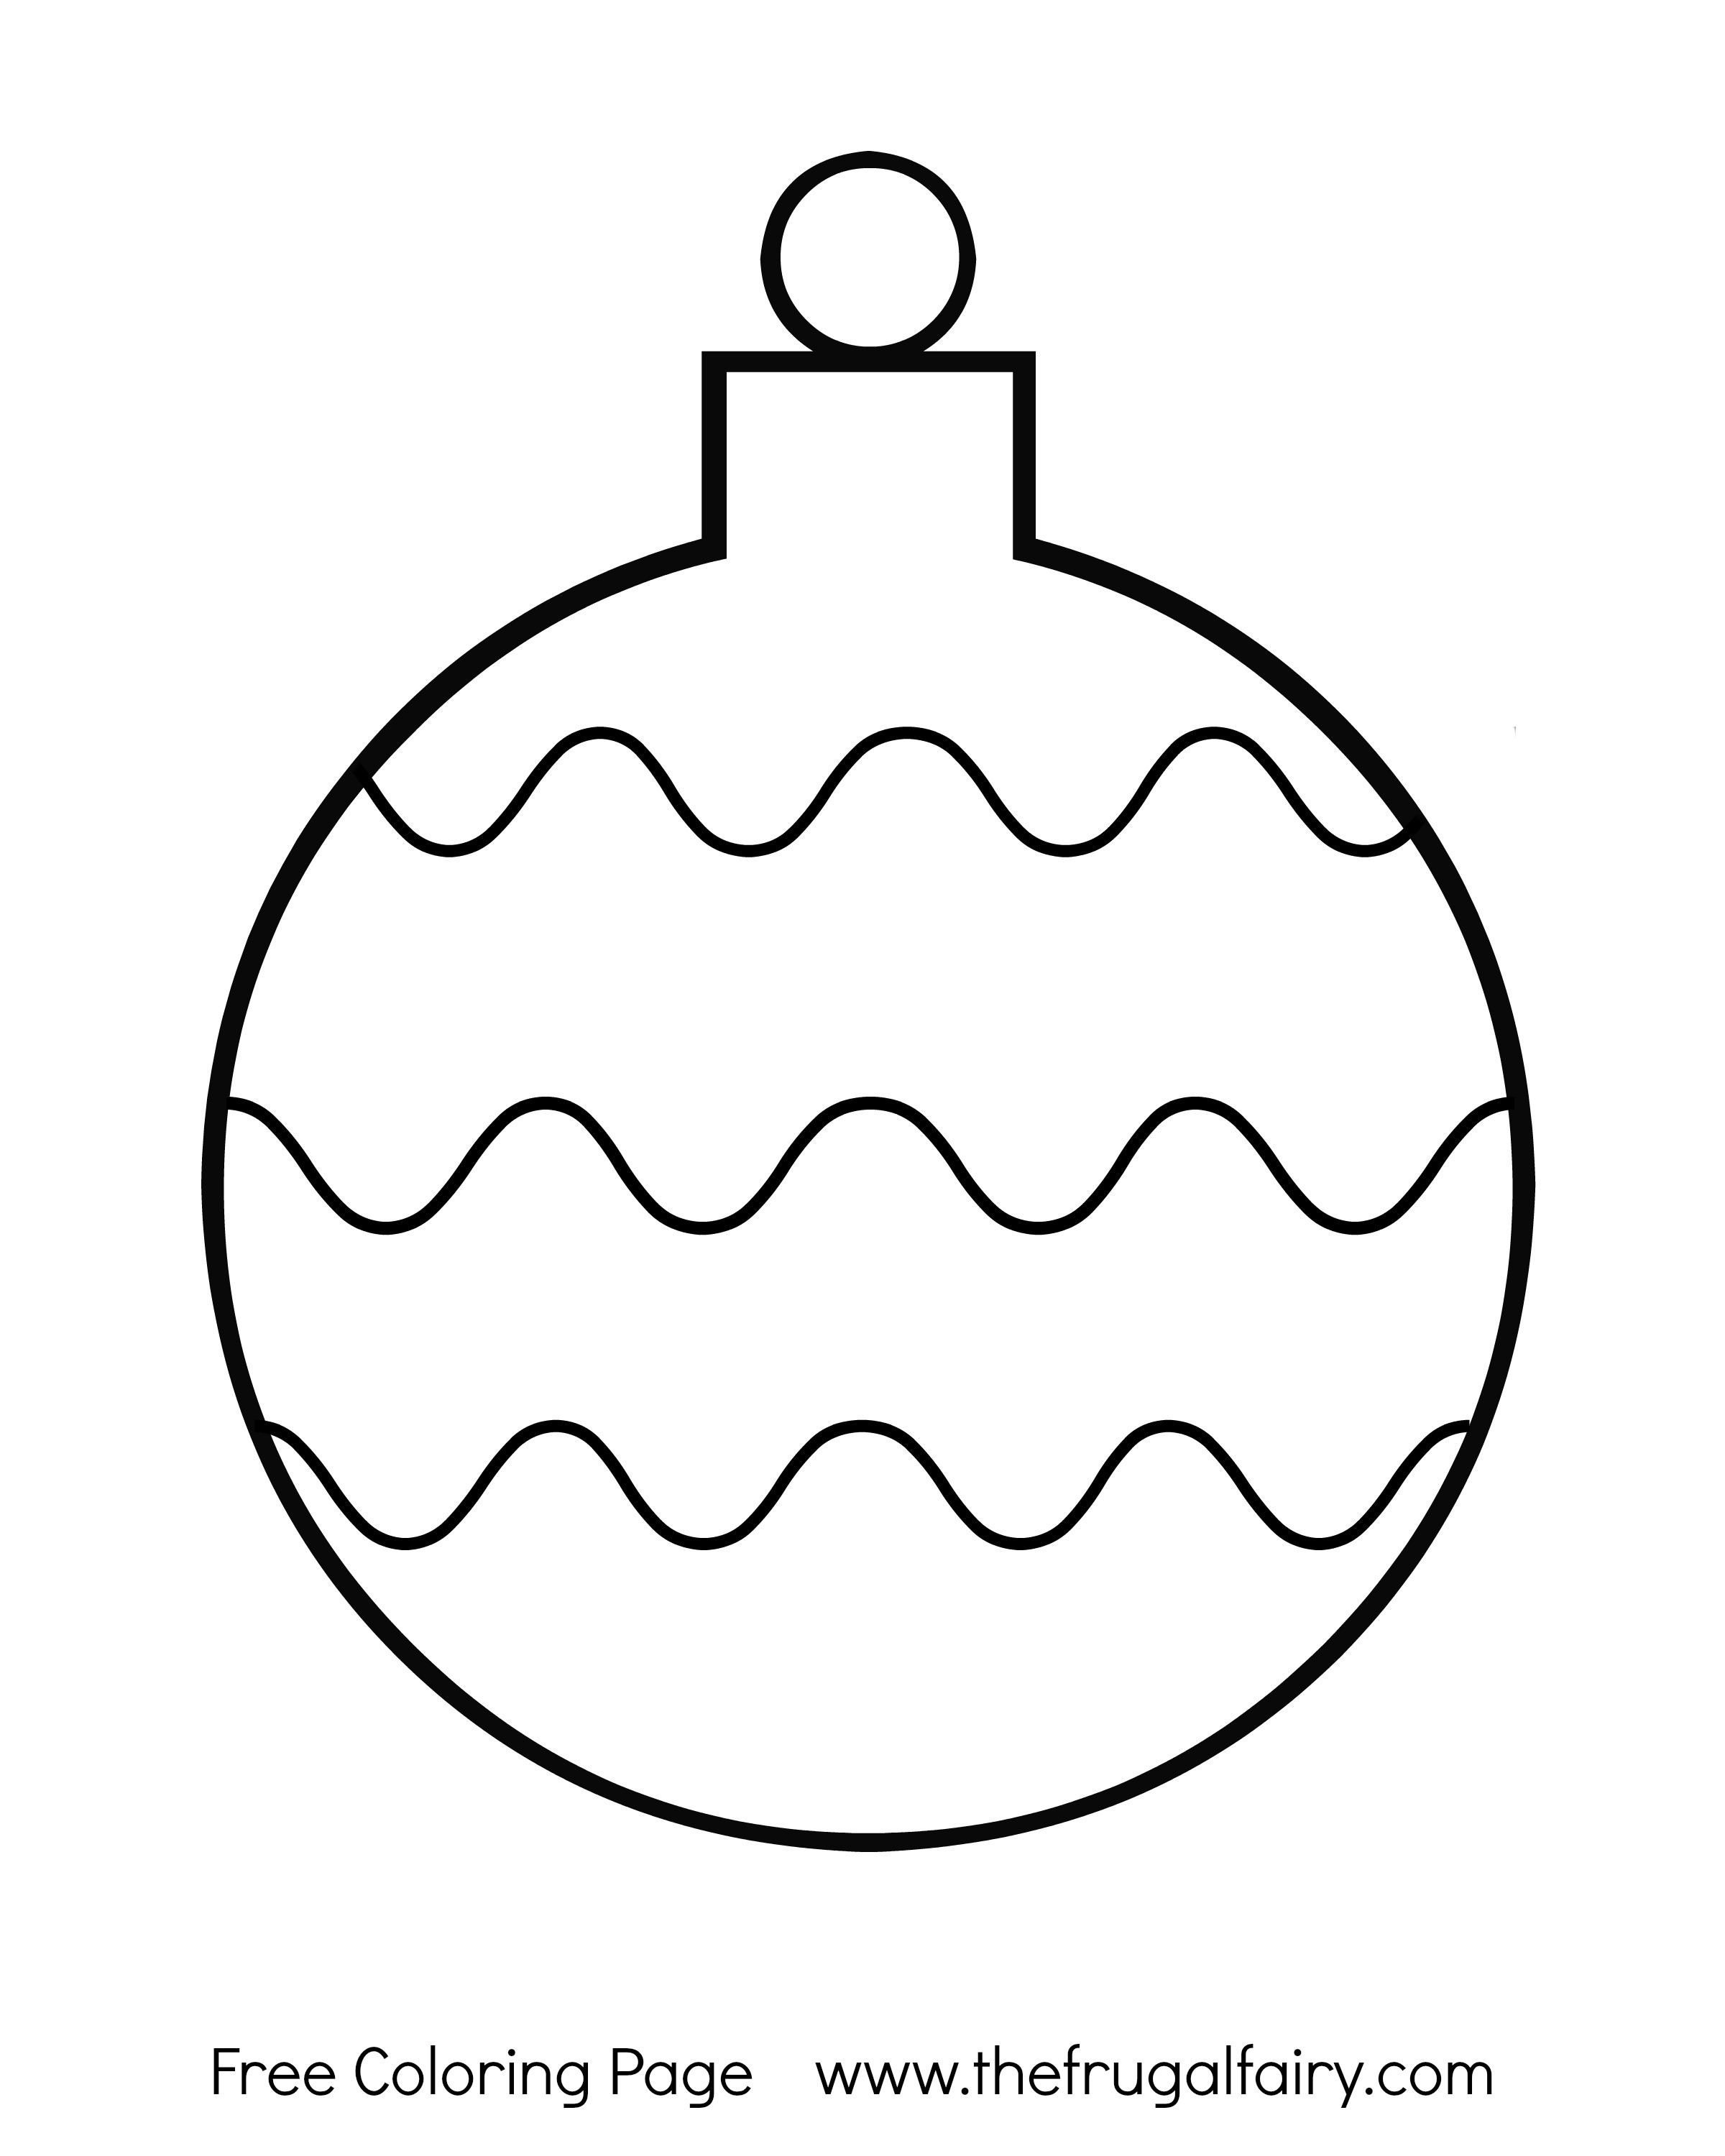 Printable Ornament Coloring Pages At GetColorings Free Printable Colorings Pages To Print